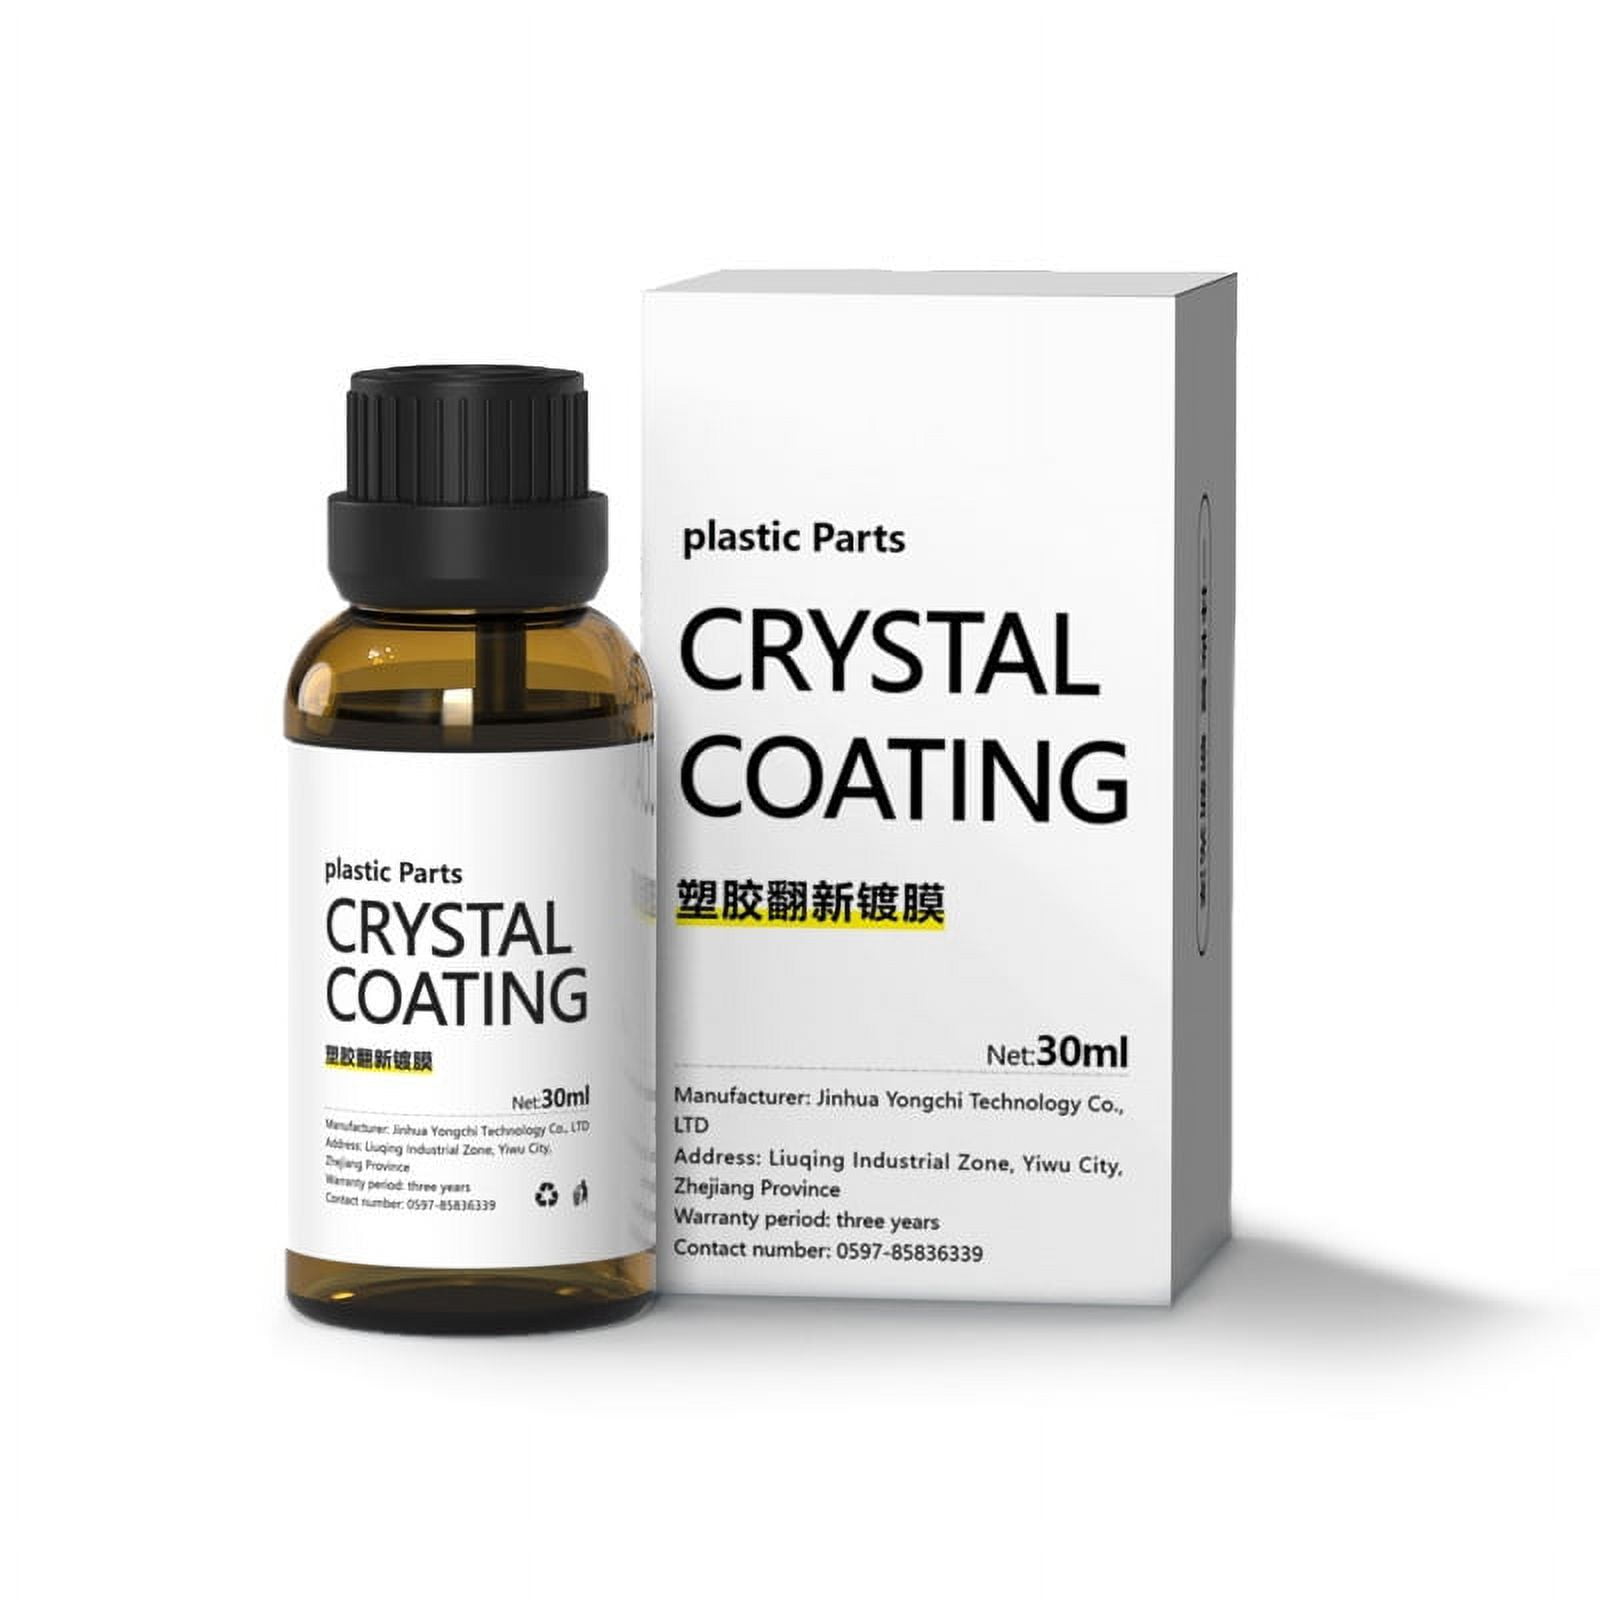 VYOFLA Plastic Parts Crystal Coating - 30ml Easy to Use Car Refresher -  [NEW] Agent for - Great Gloss Protection - Revitalizing with Sponge and Rag